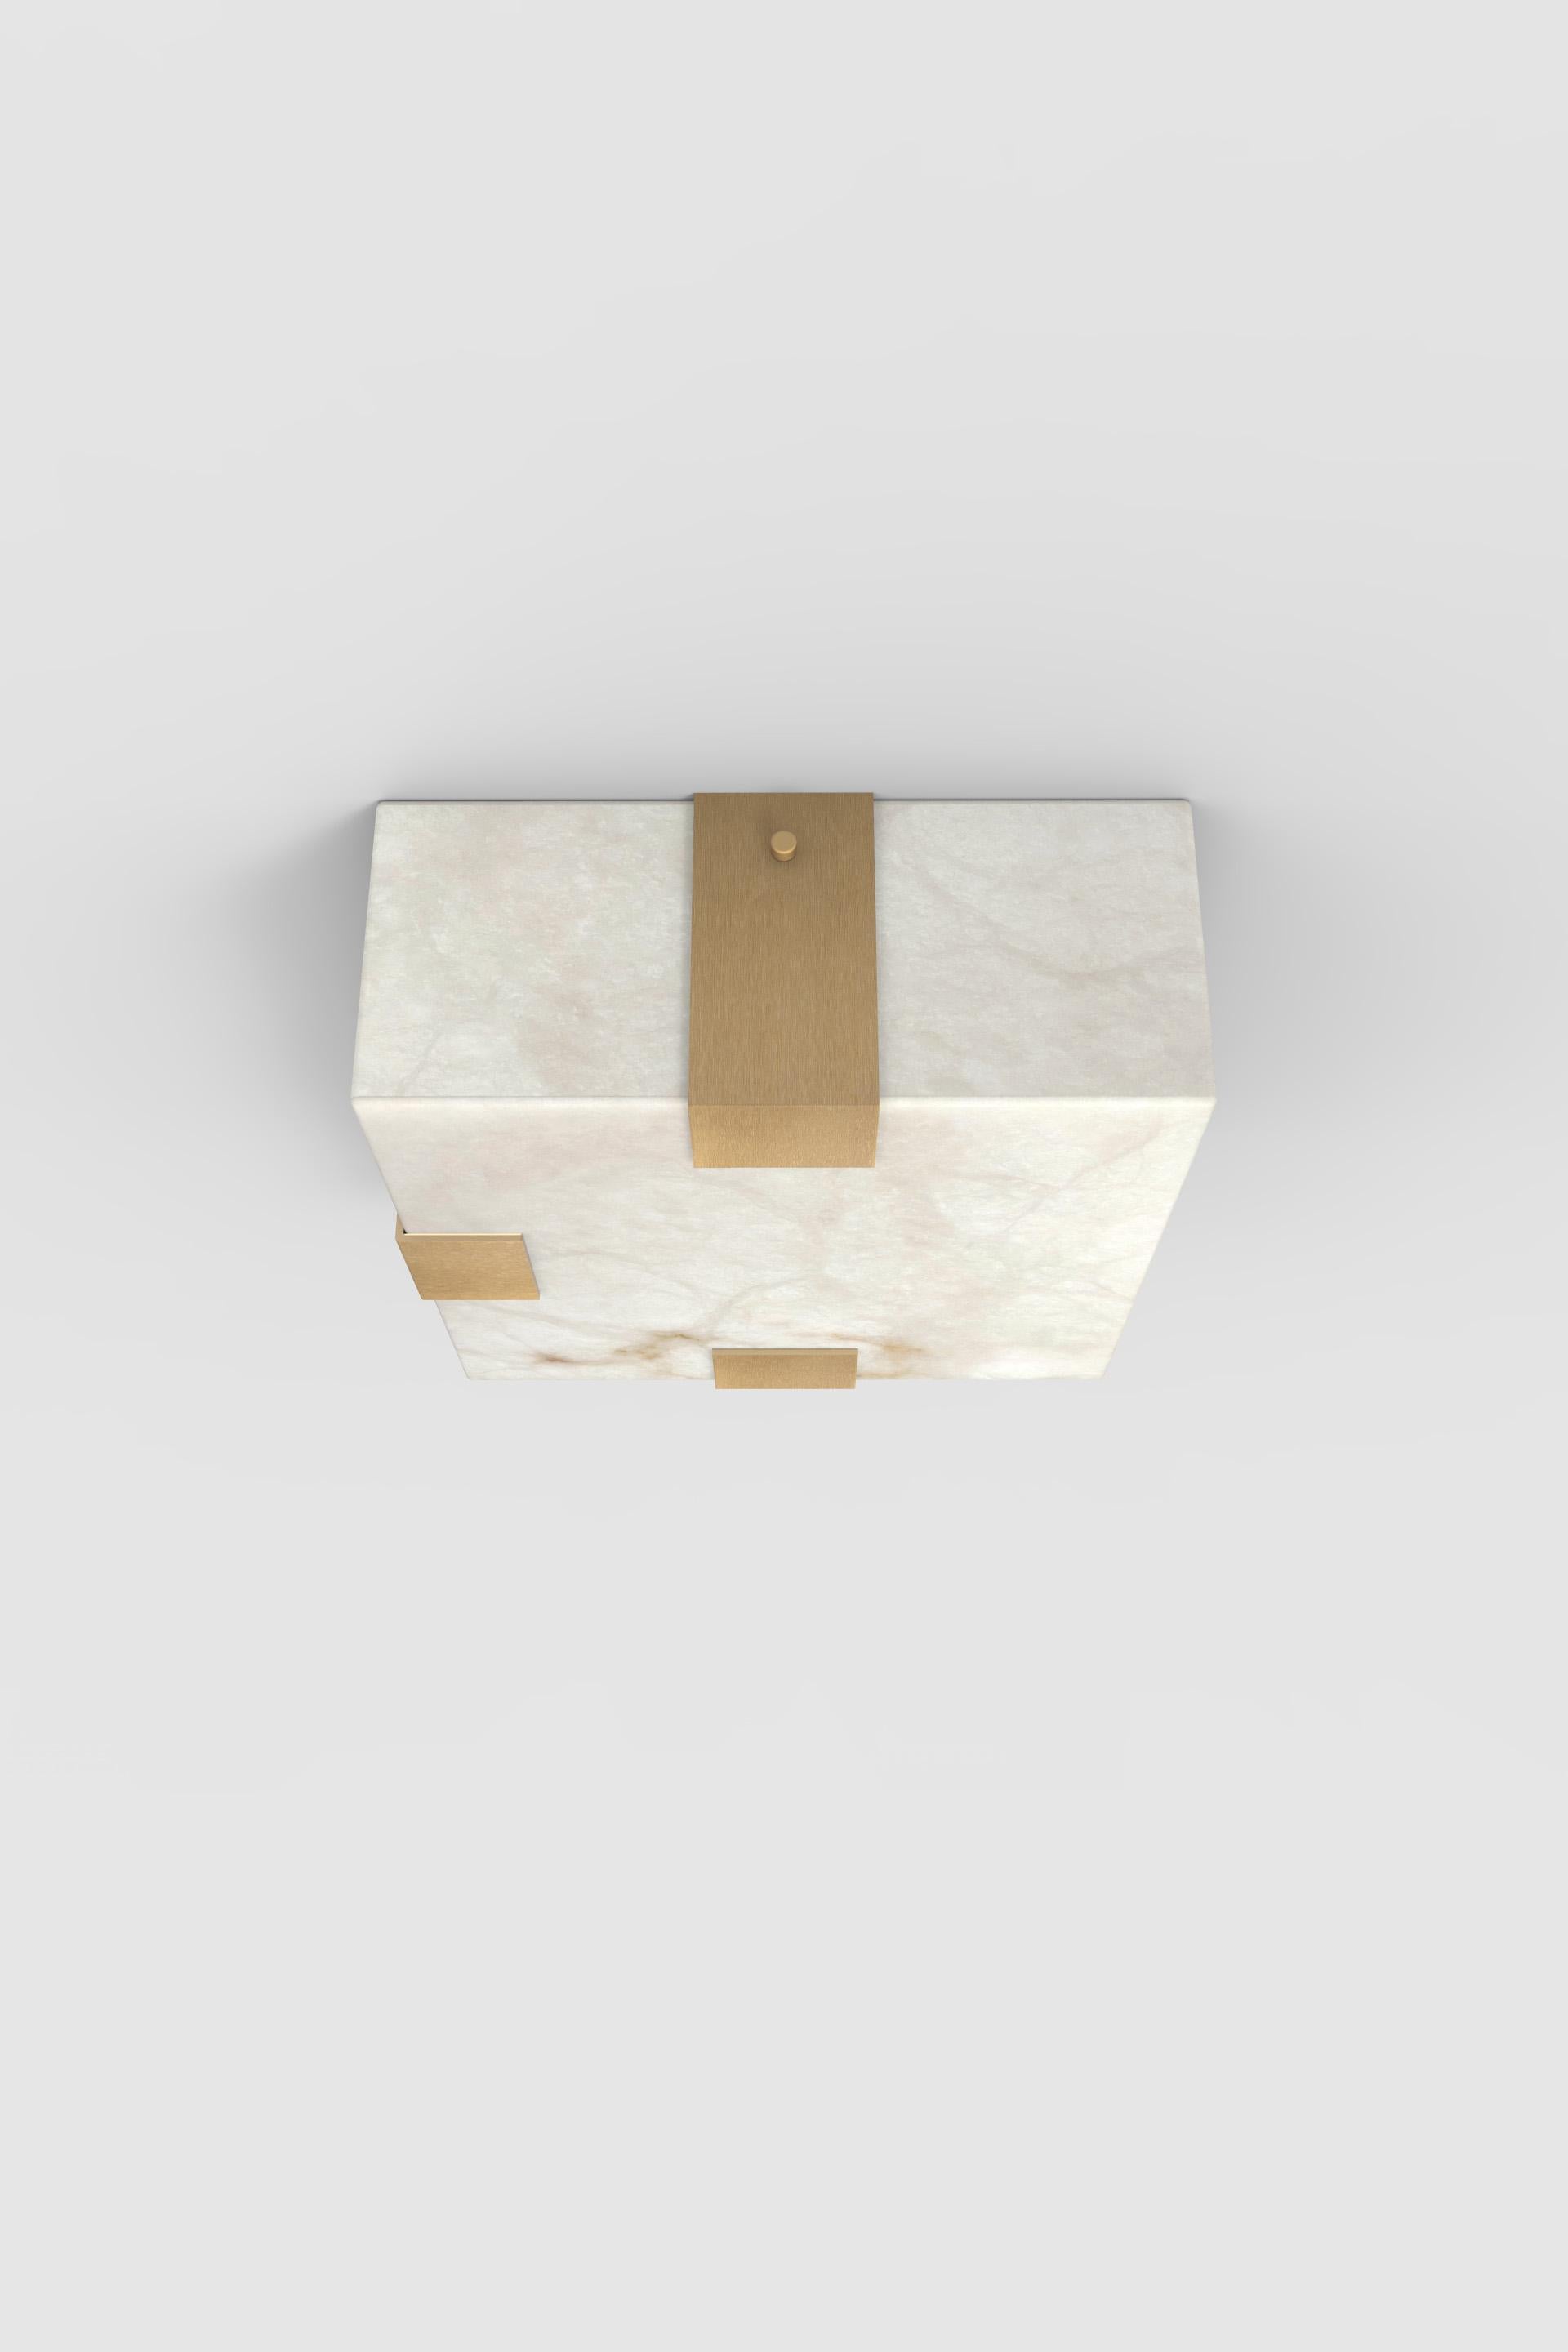 Post-Modern Contemporary Ponti Flush Mount 002A-3C in Alabaster by Orphan Work For Sale